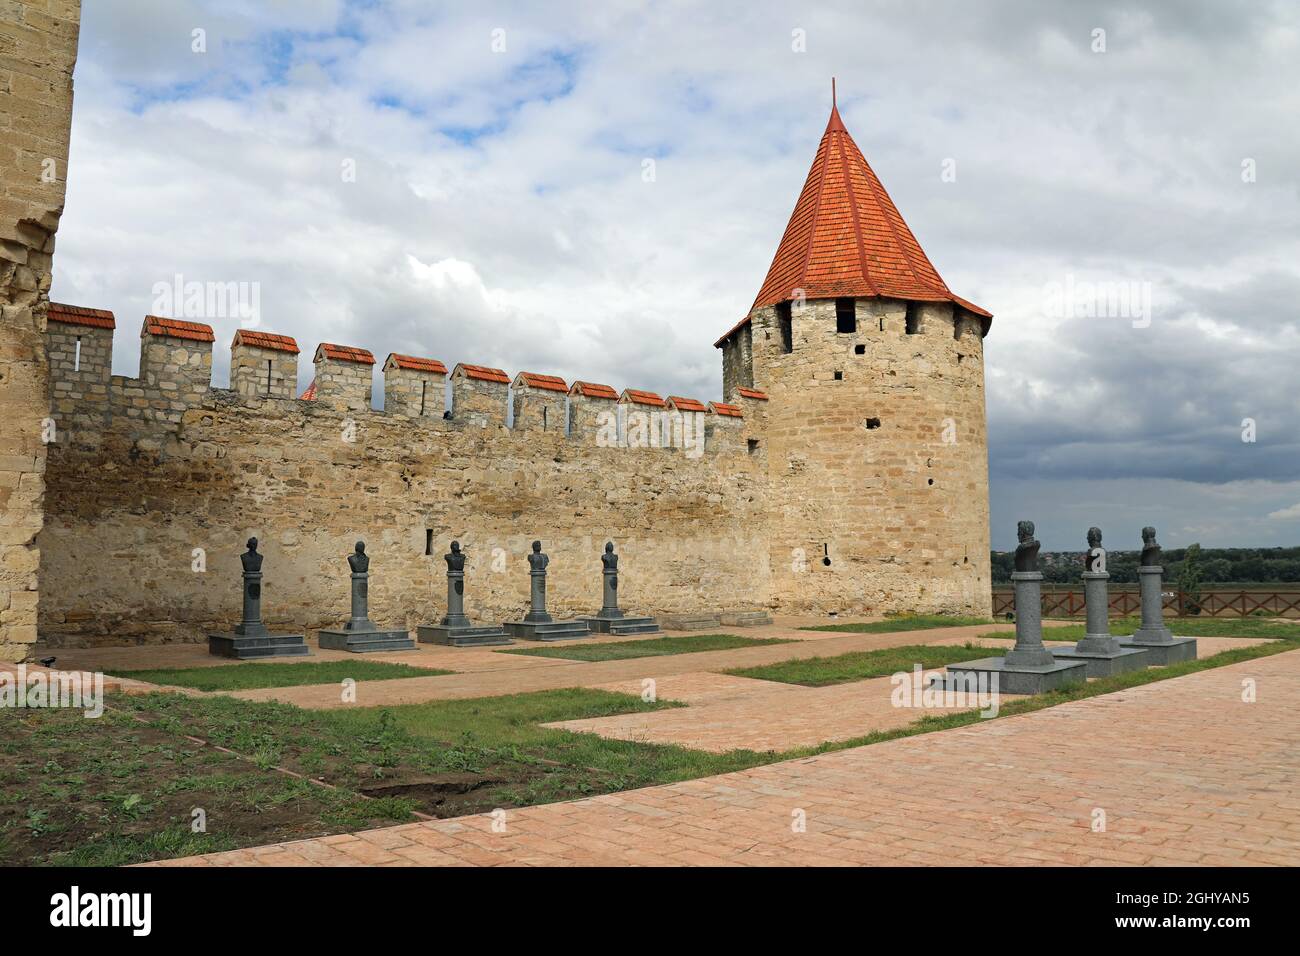 Fortress of Bender in Transnistria Stock Photo